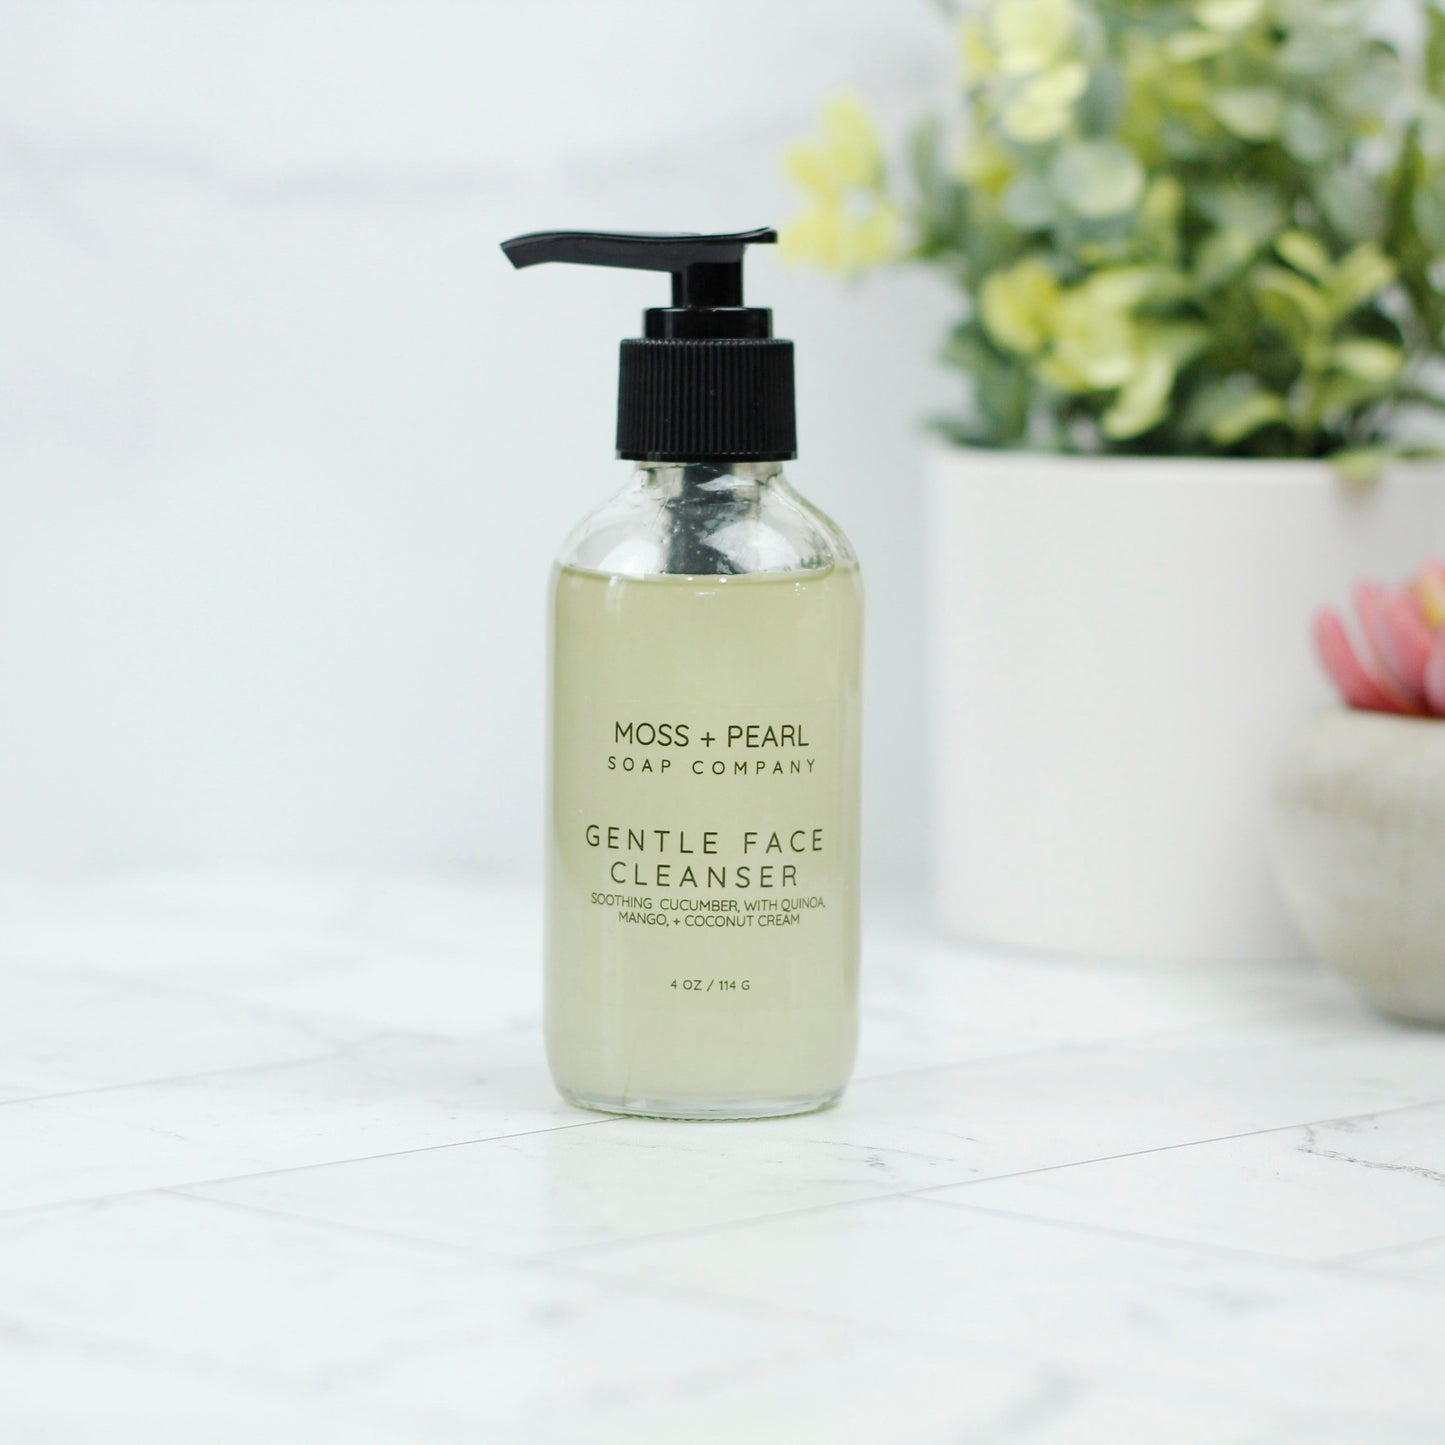 GENTLE FACE CLEANSER Moss + Pearl Soap Company